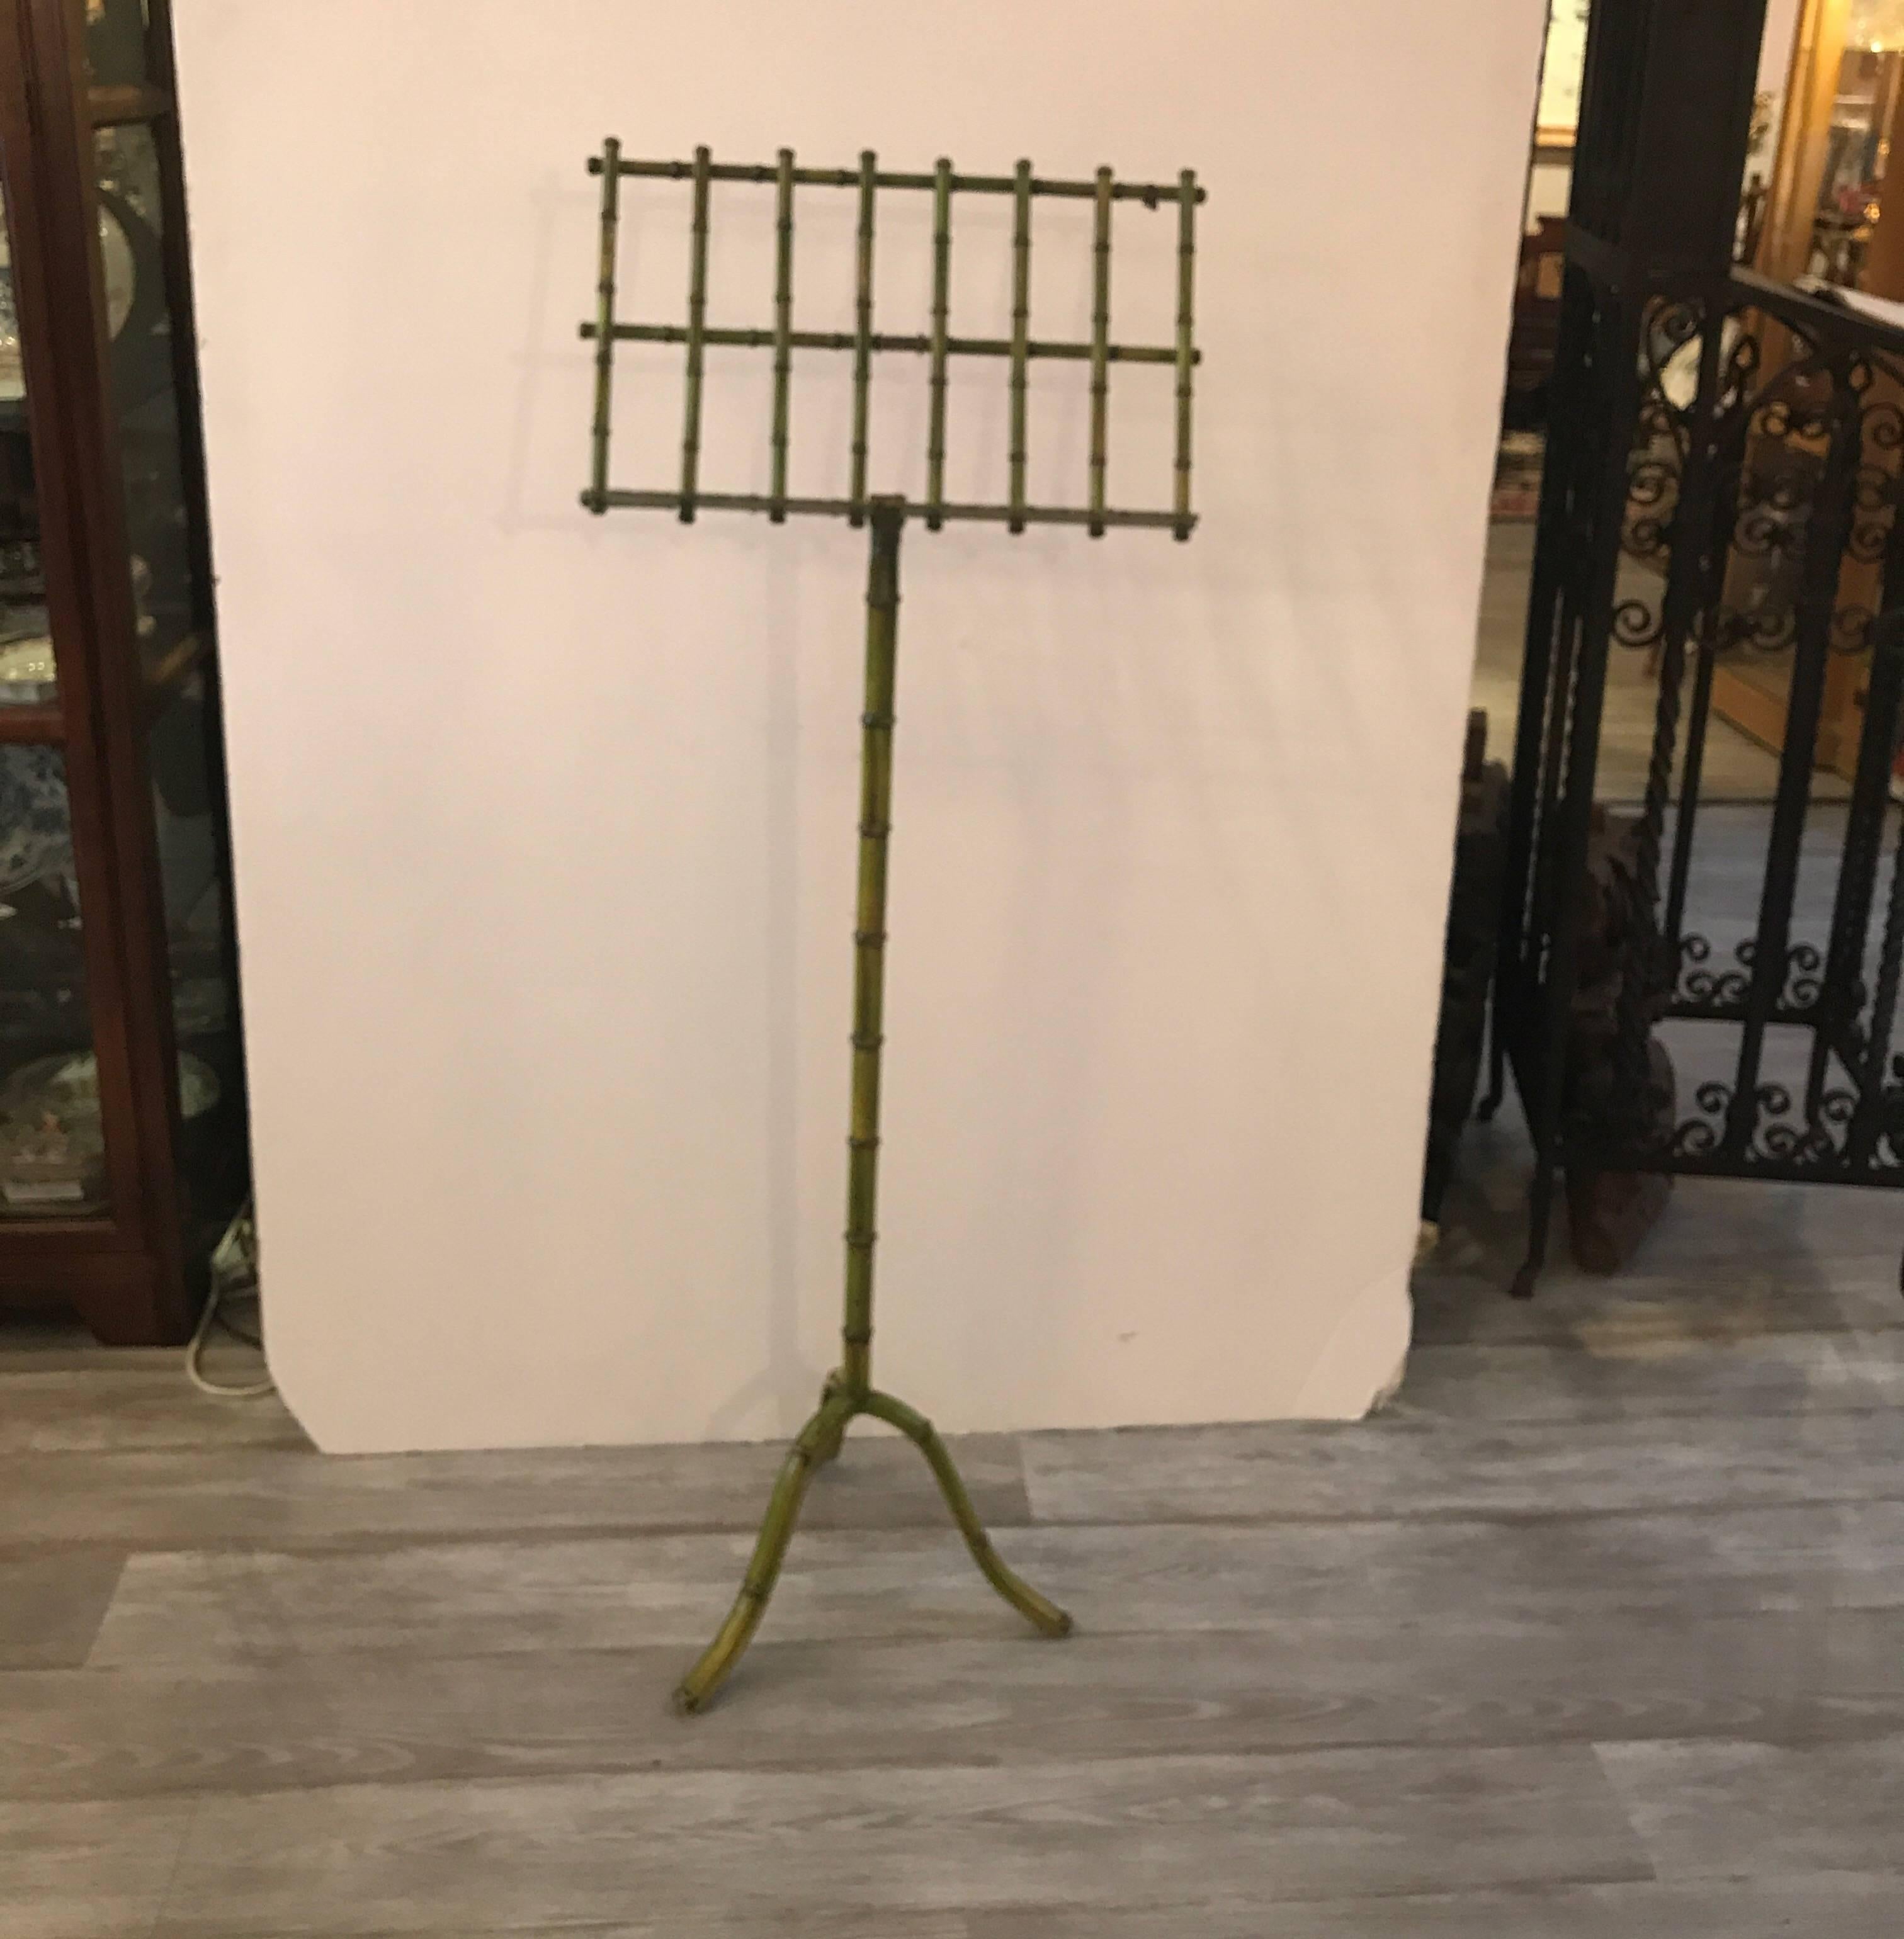 Whimsical painted metal bamboo motif Music stand made in Italy. The top of the stand is adjustable with a central pole on tripod base. All painted in a natural bamboo green finish.